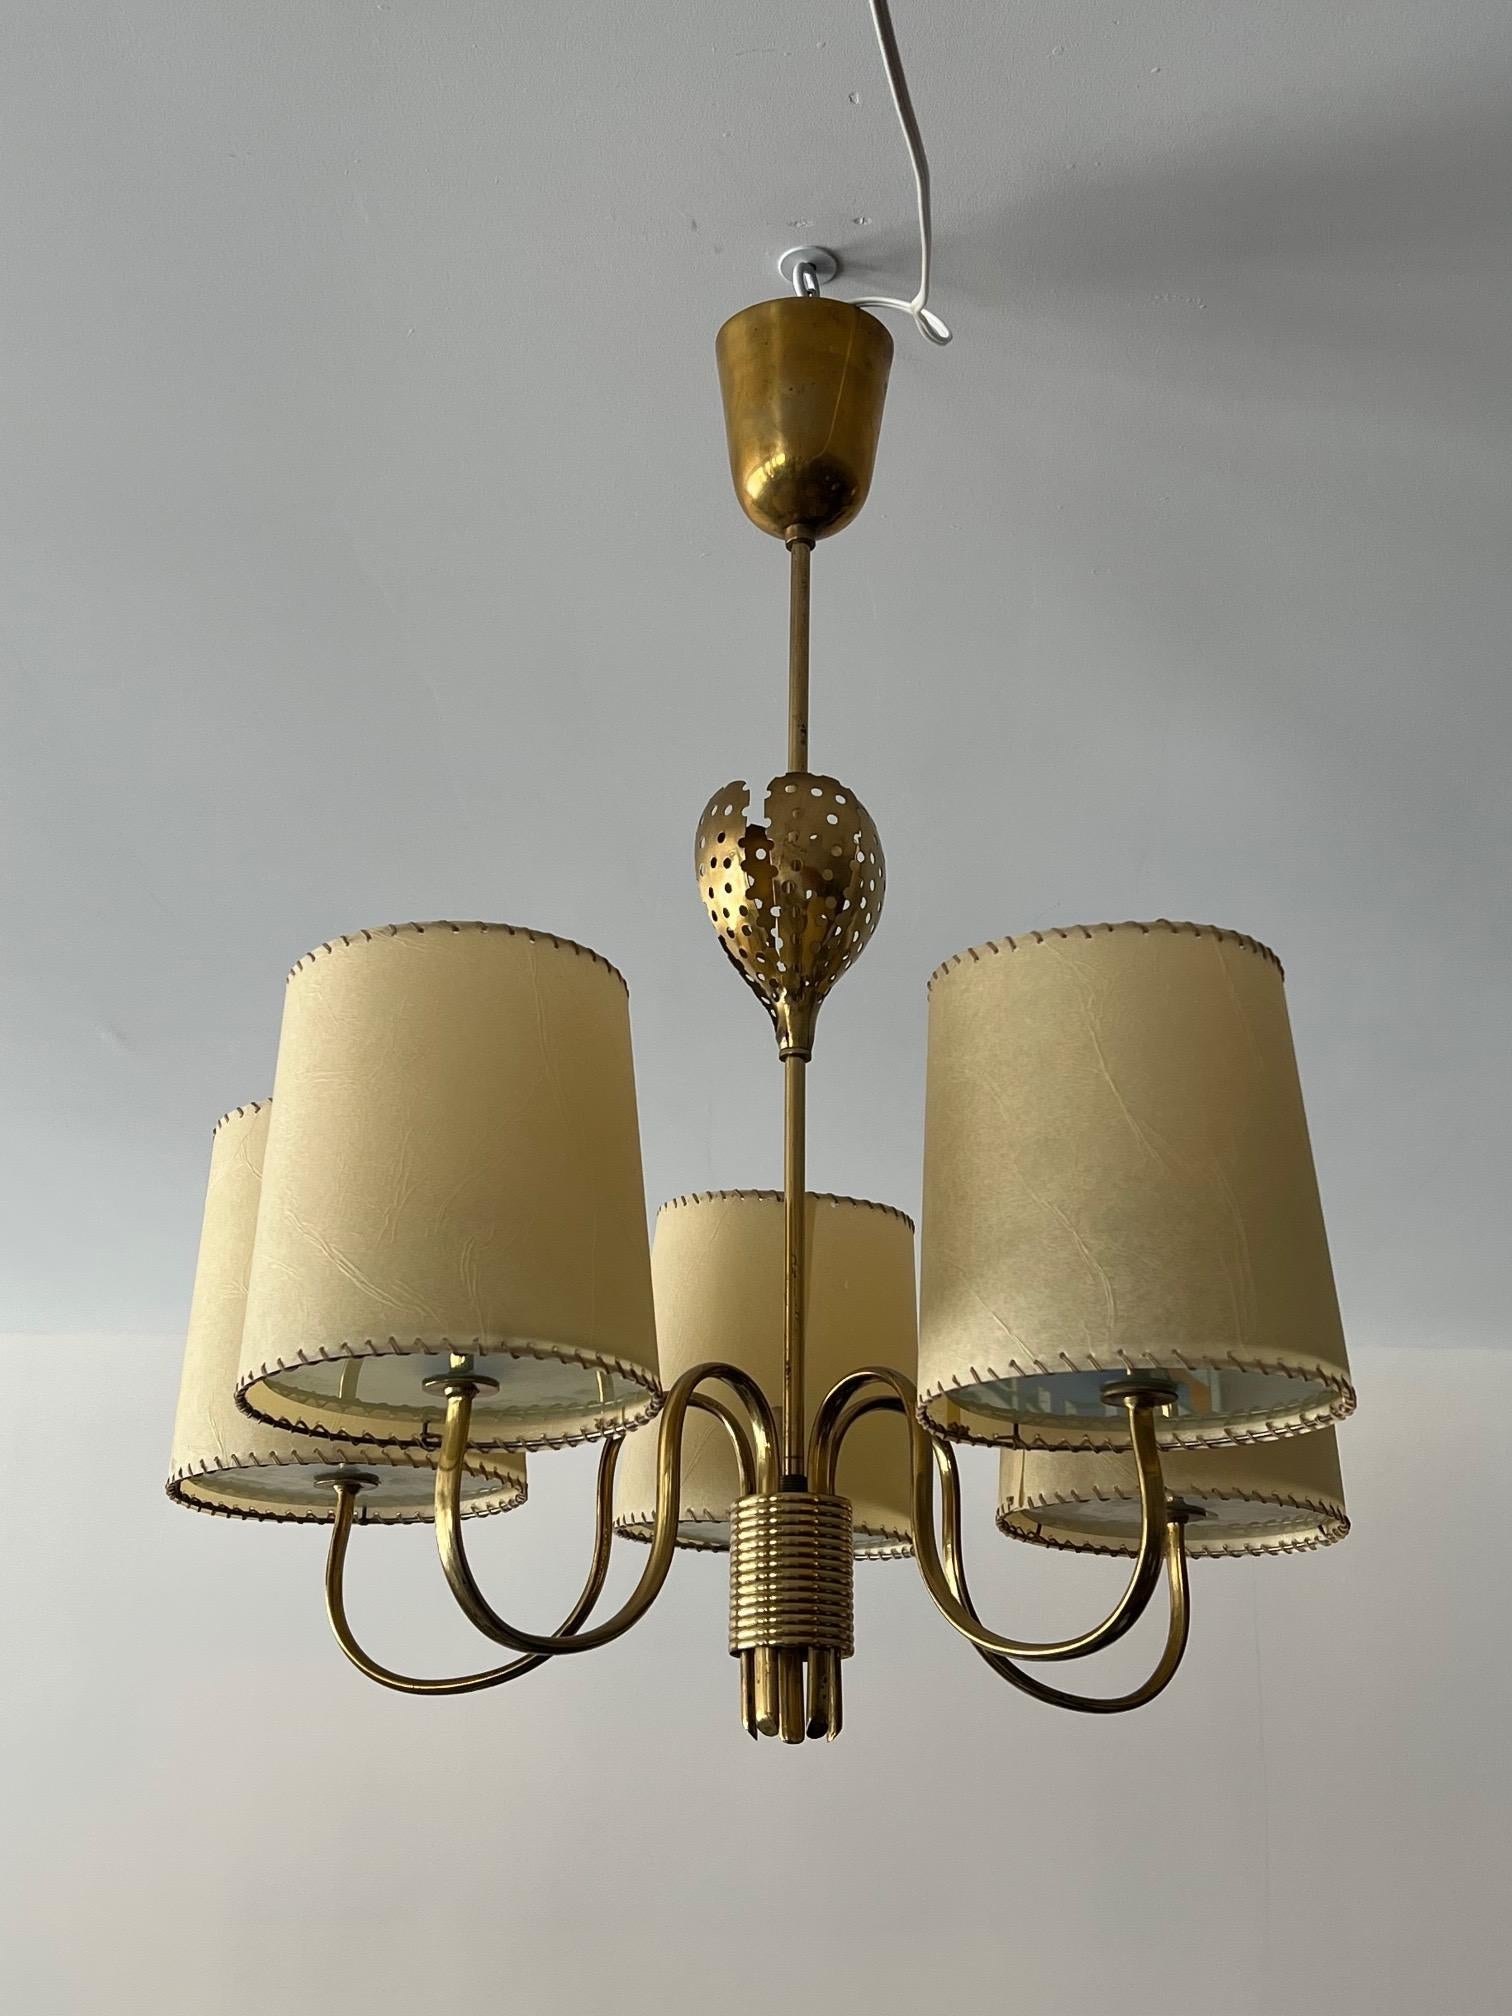 An original Paavo Tynell five arm chandelier for Taito Oy, ca' 1950's. Stamped inside model 9030. Nice patina, original shades, glass diffusers, shows beautifully.